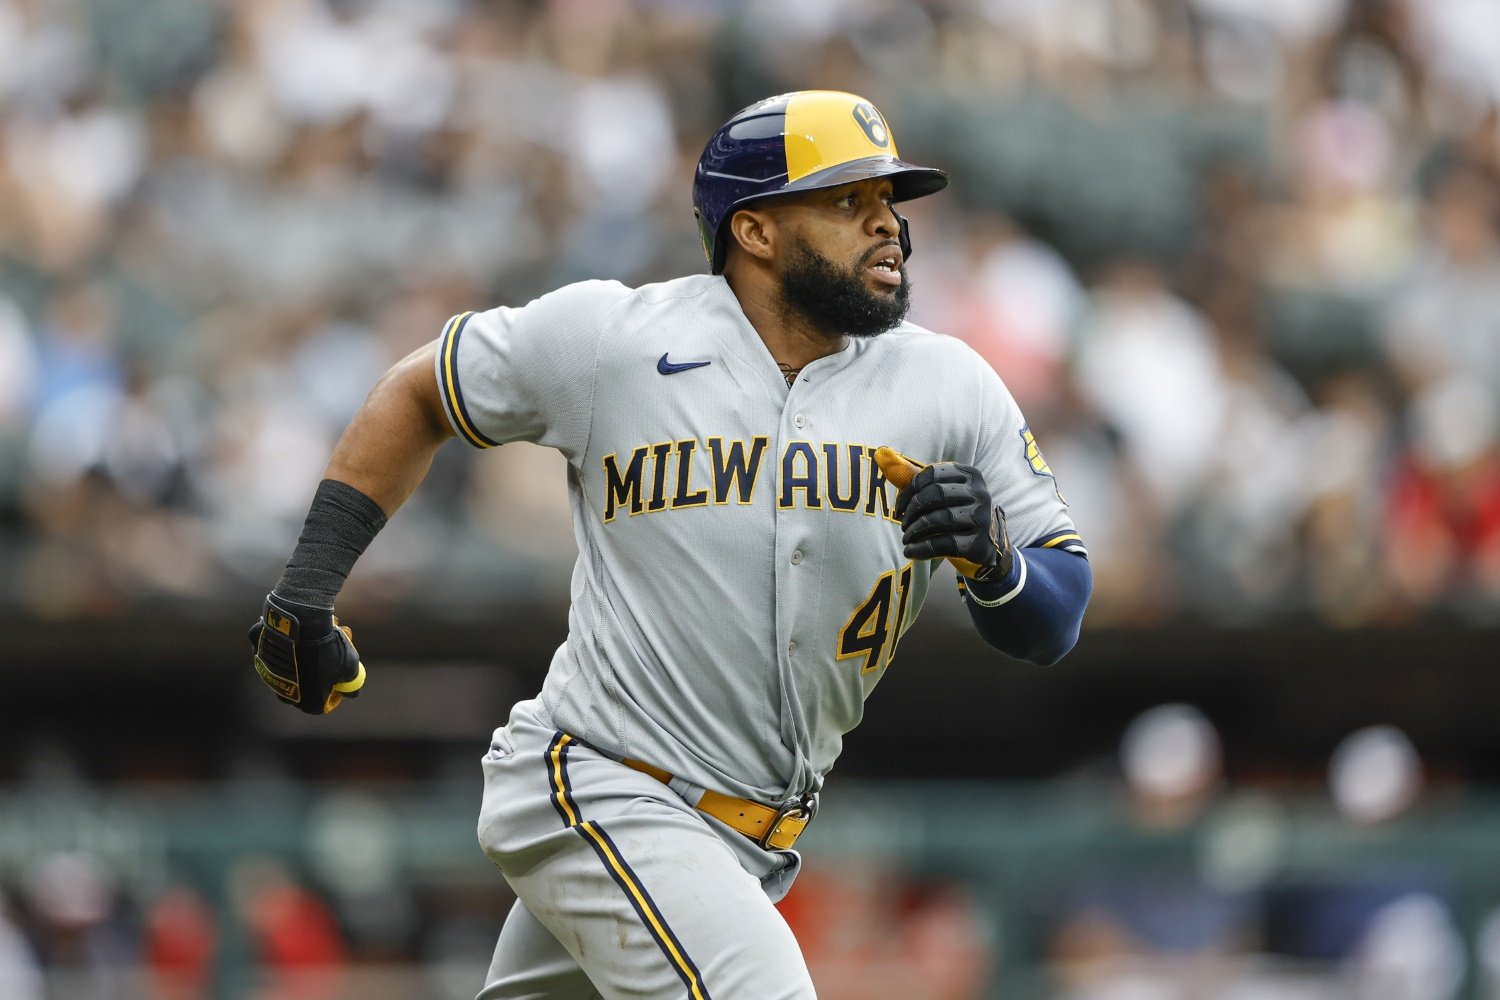 What Going On With the Brewers' Trade Deadline Additions